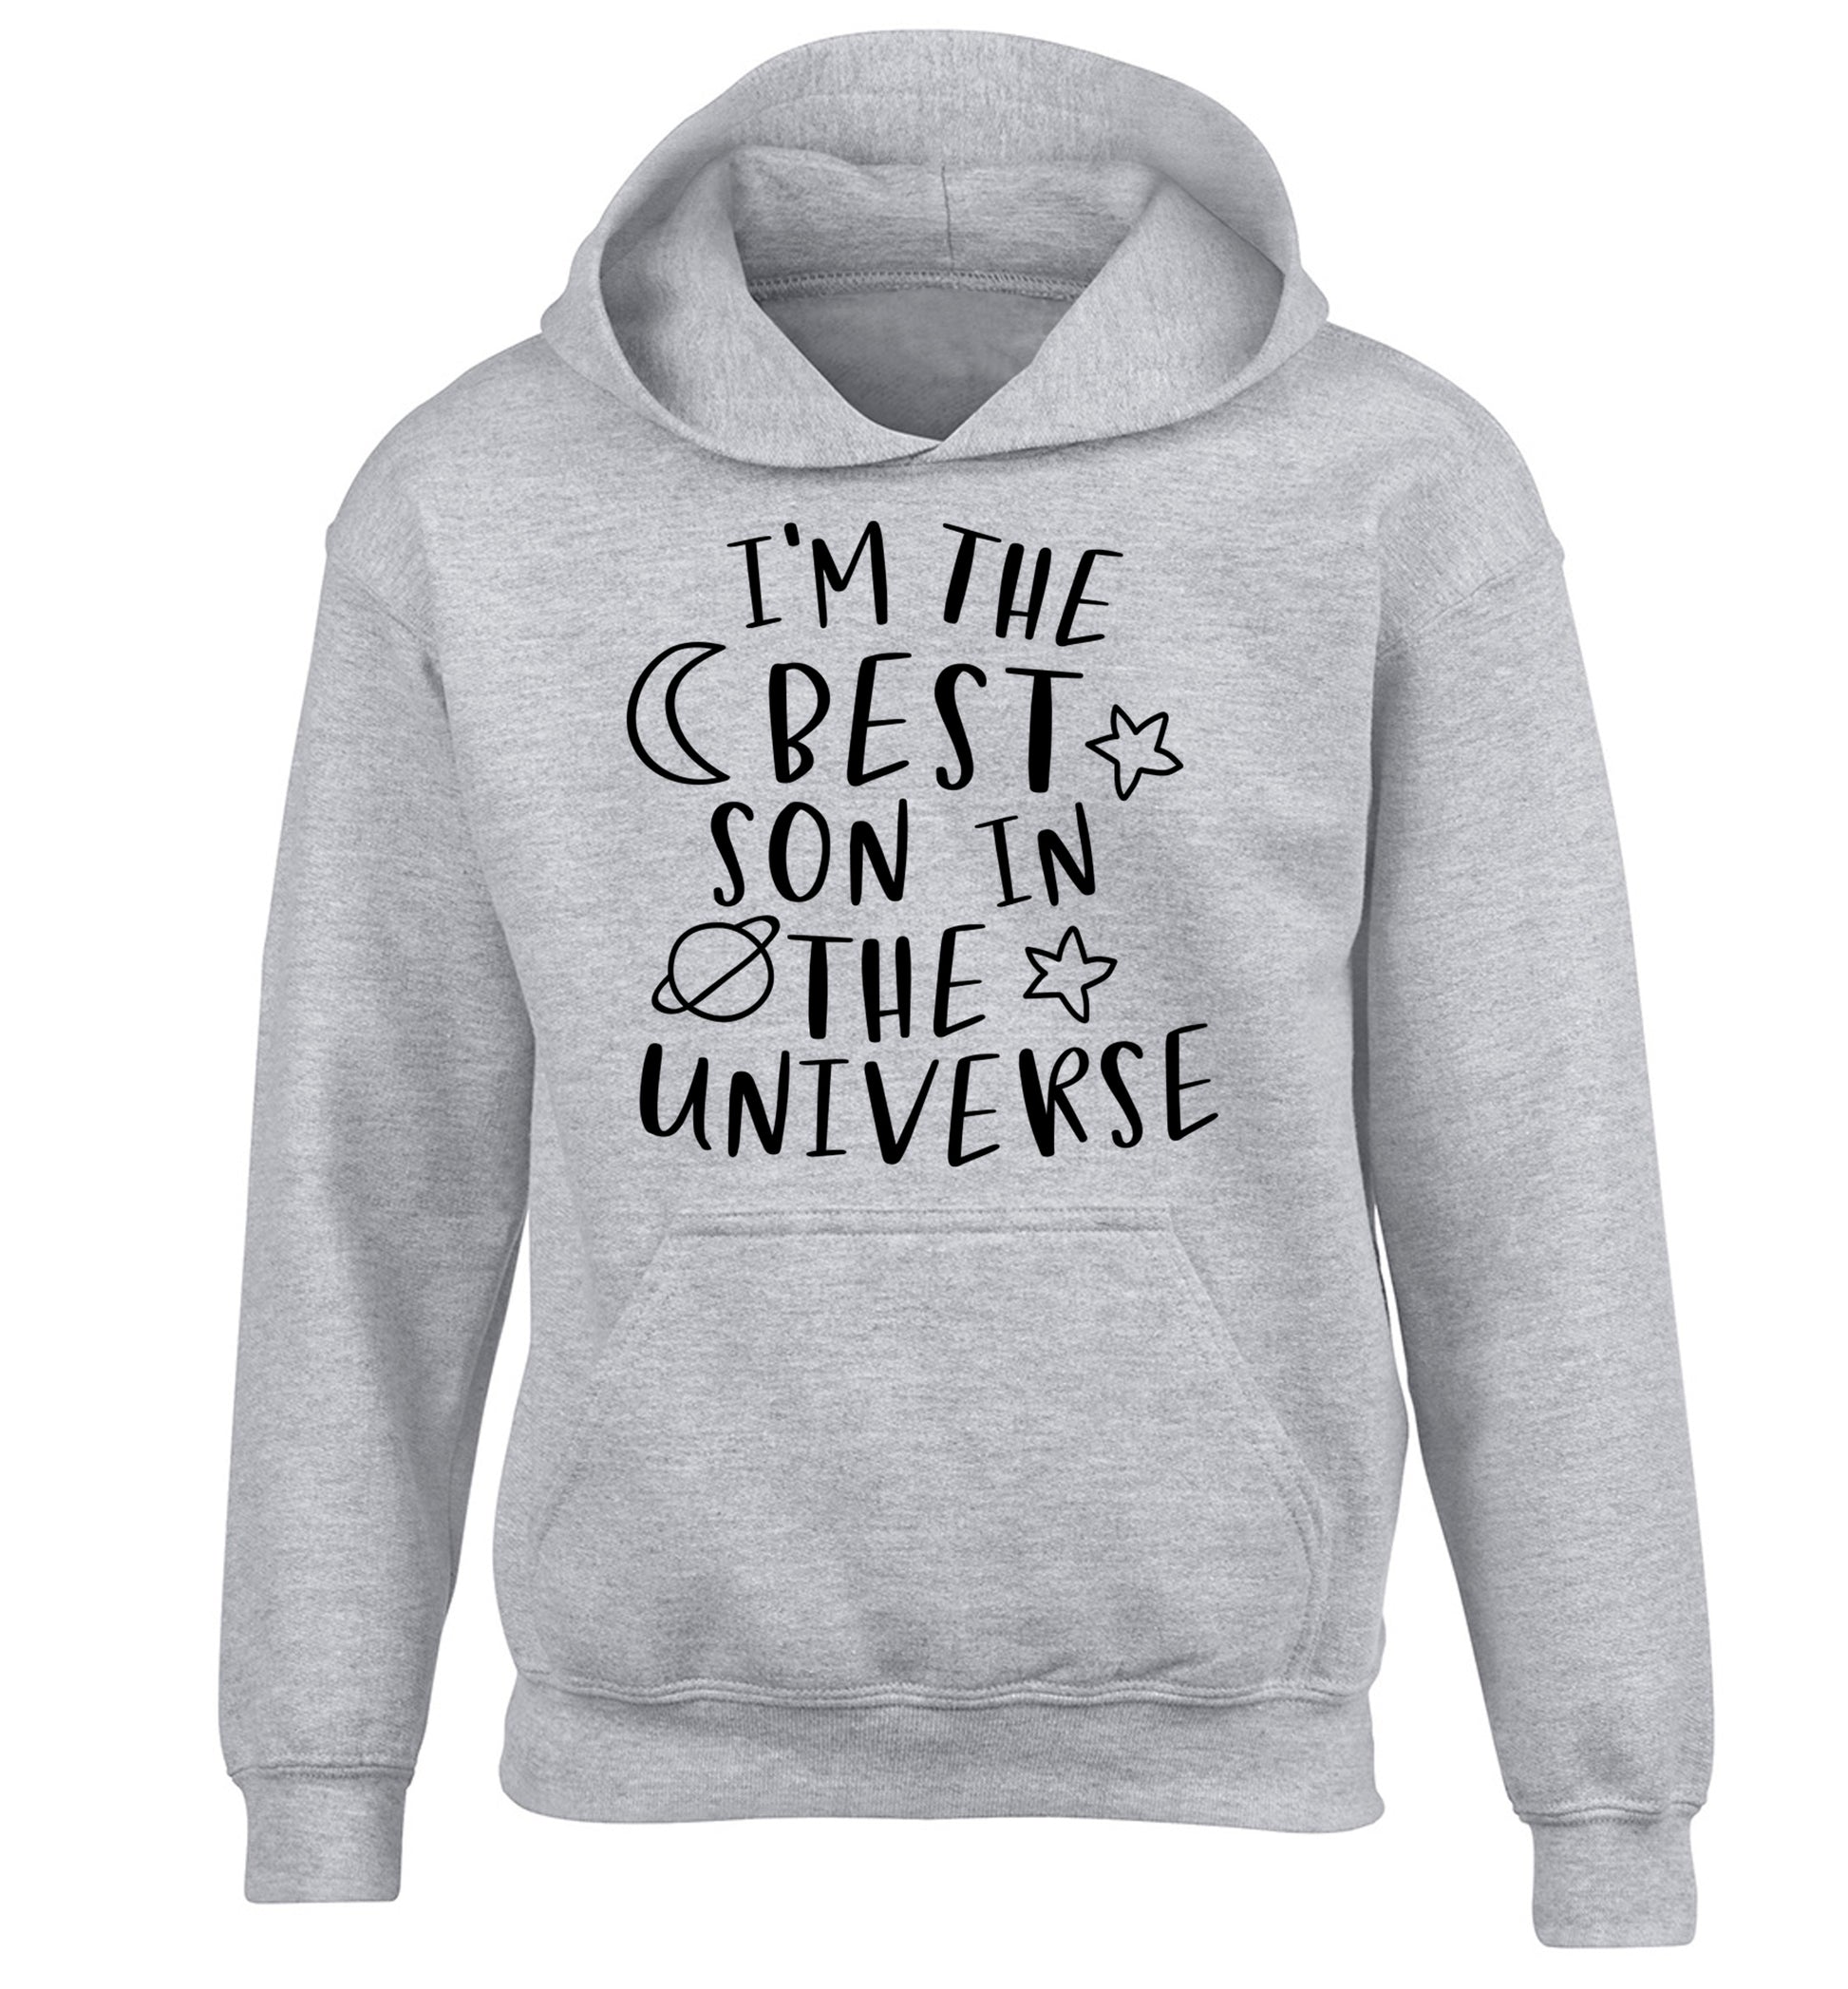 I'm the best son in the universe children's grey hoodie 12-13 Years